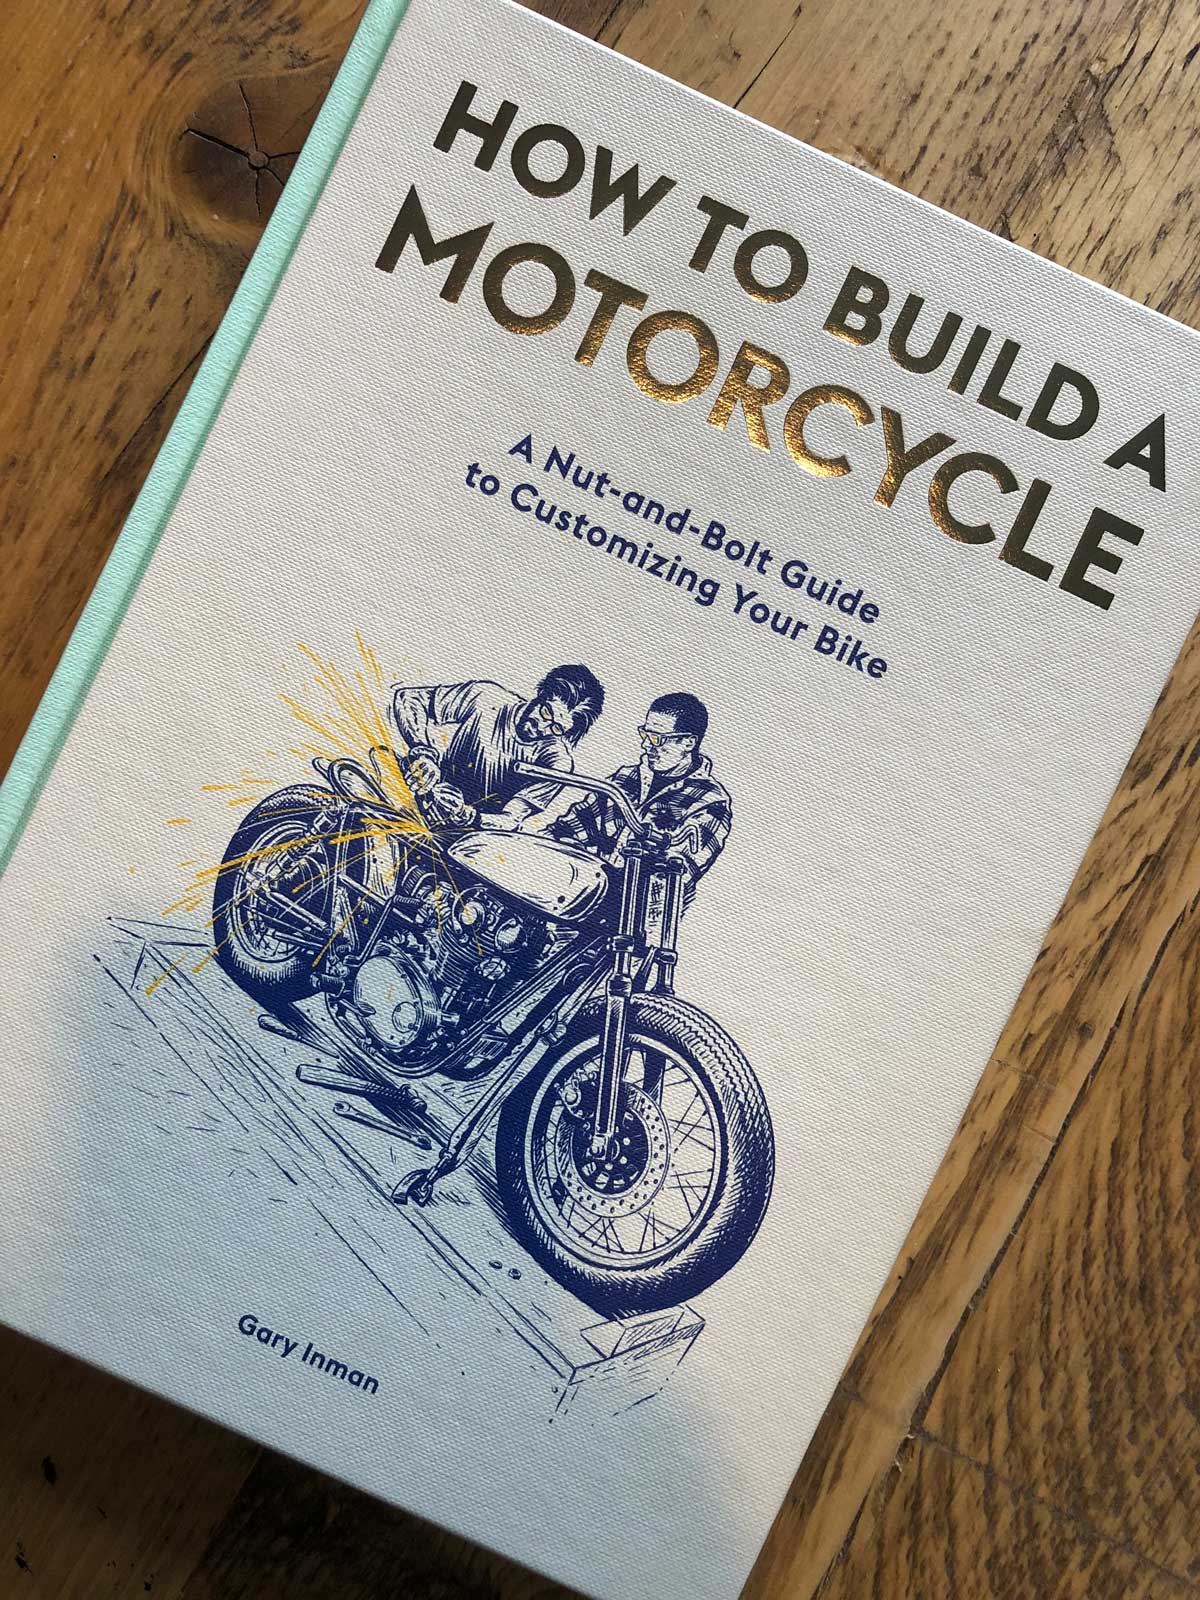 How to Build a Motorcycle Book Cover